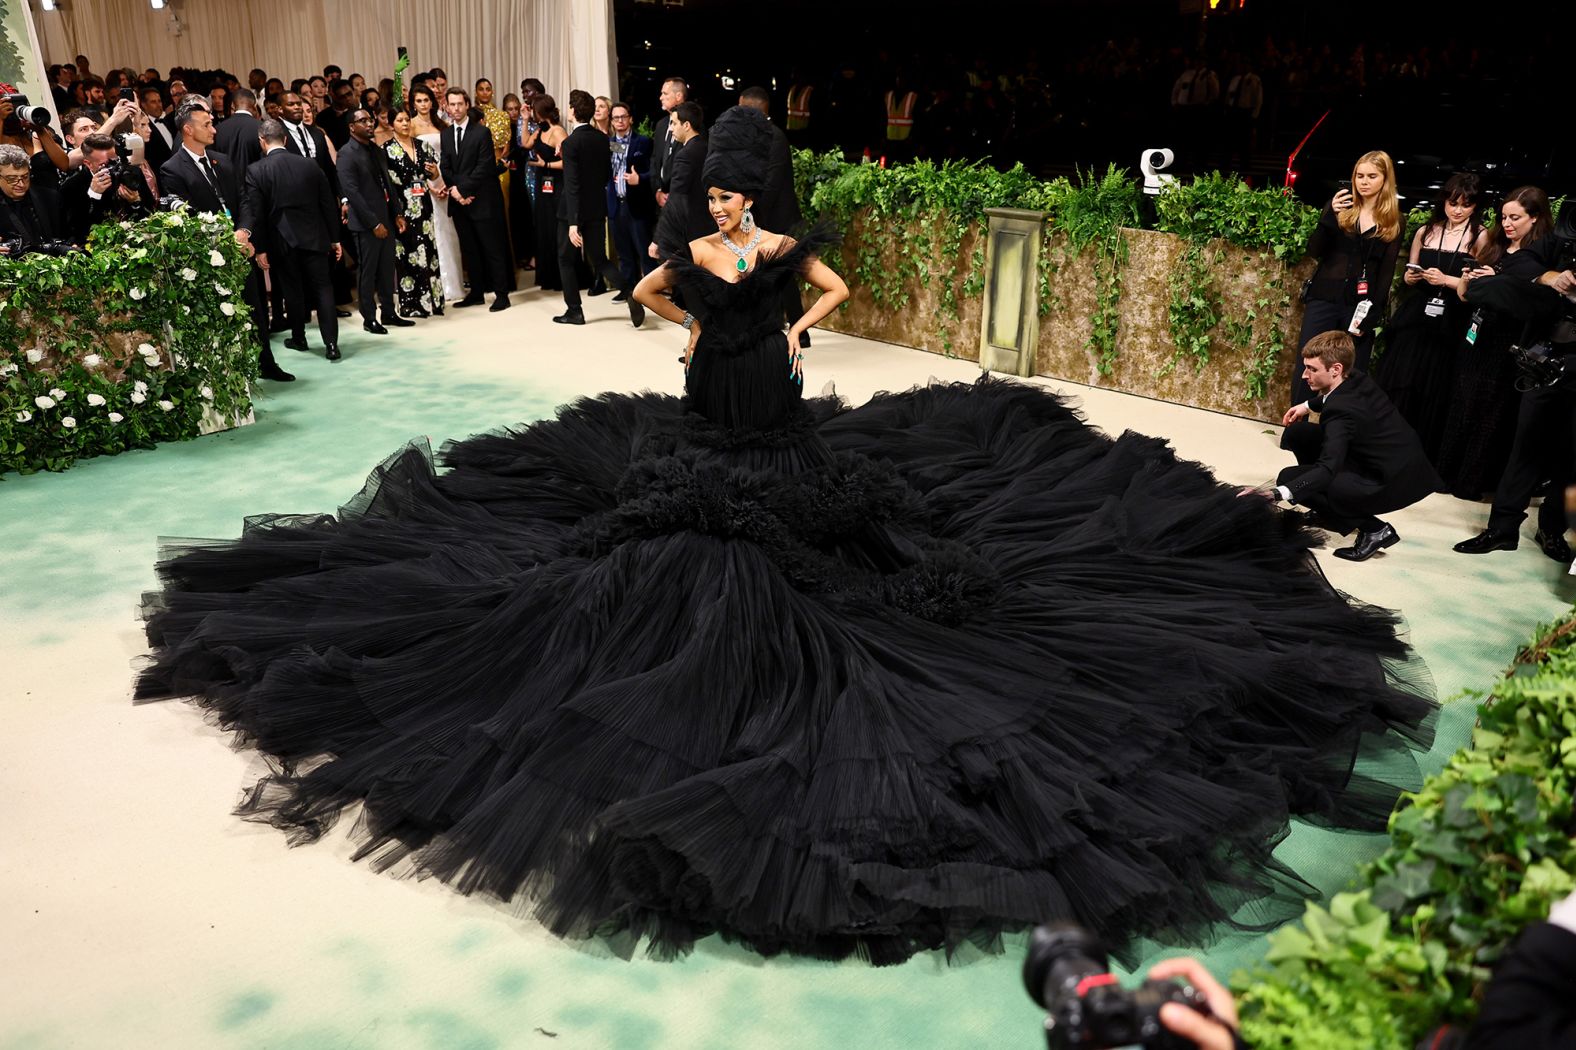 Cardi B brought the drama in a black dress by Giambattista Valli with overflowing waves of fabric, perhaps in reference to the oncoming mob in J.G. Ballard's dystopian tale, or themes of death and decay. She joked that the dress weighs five pounds more than she does. 